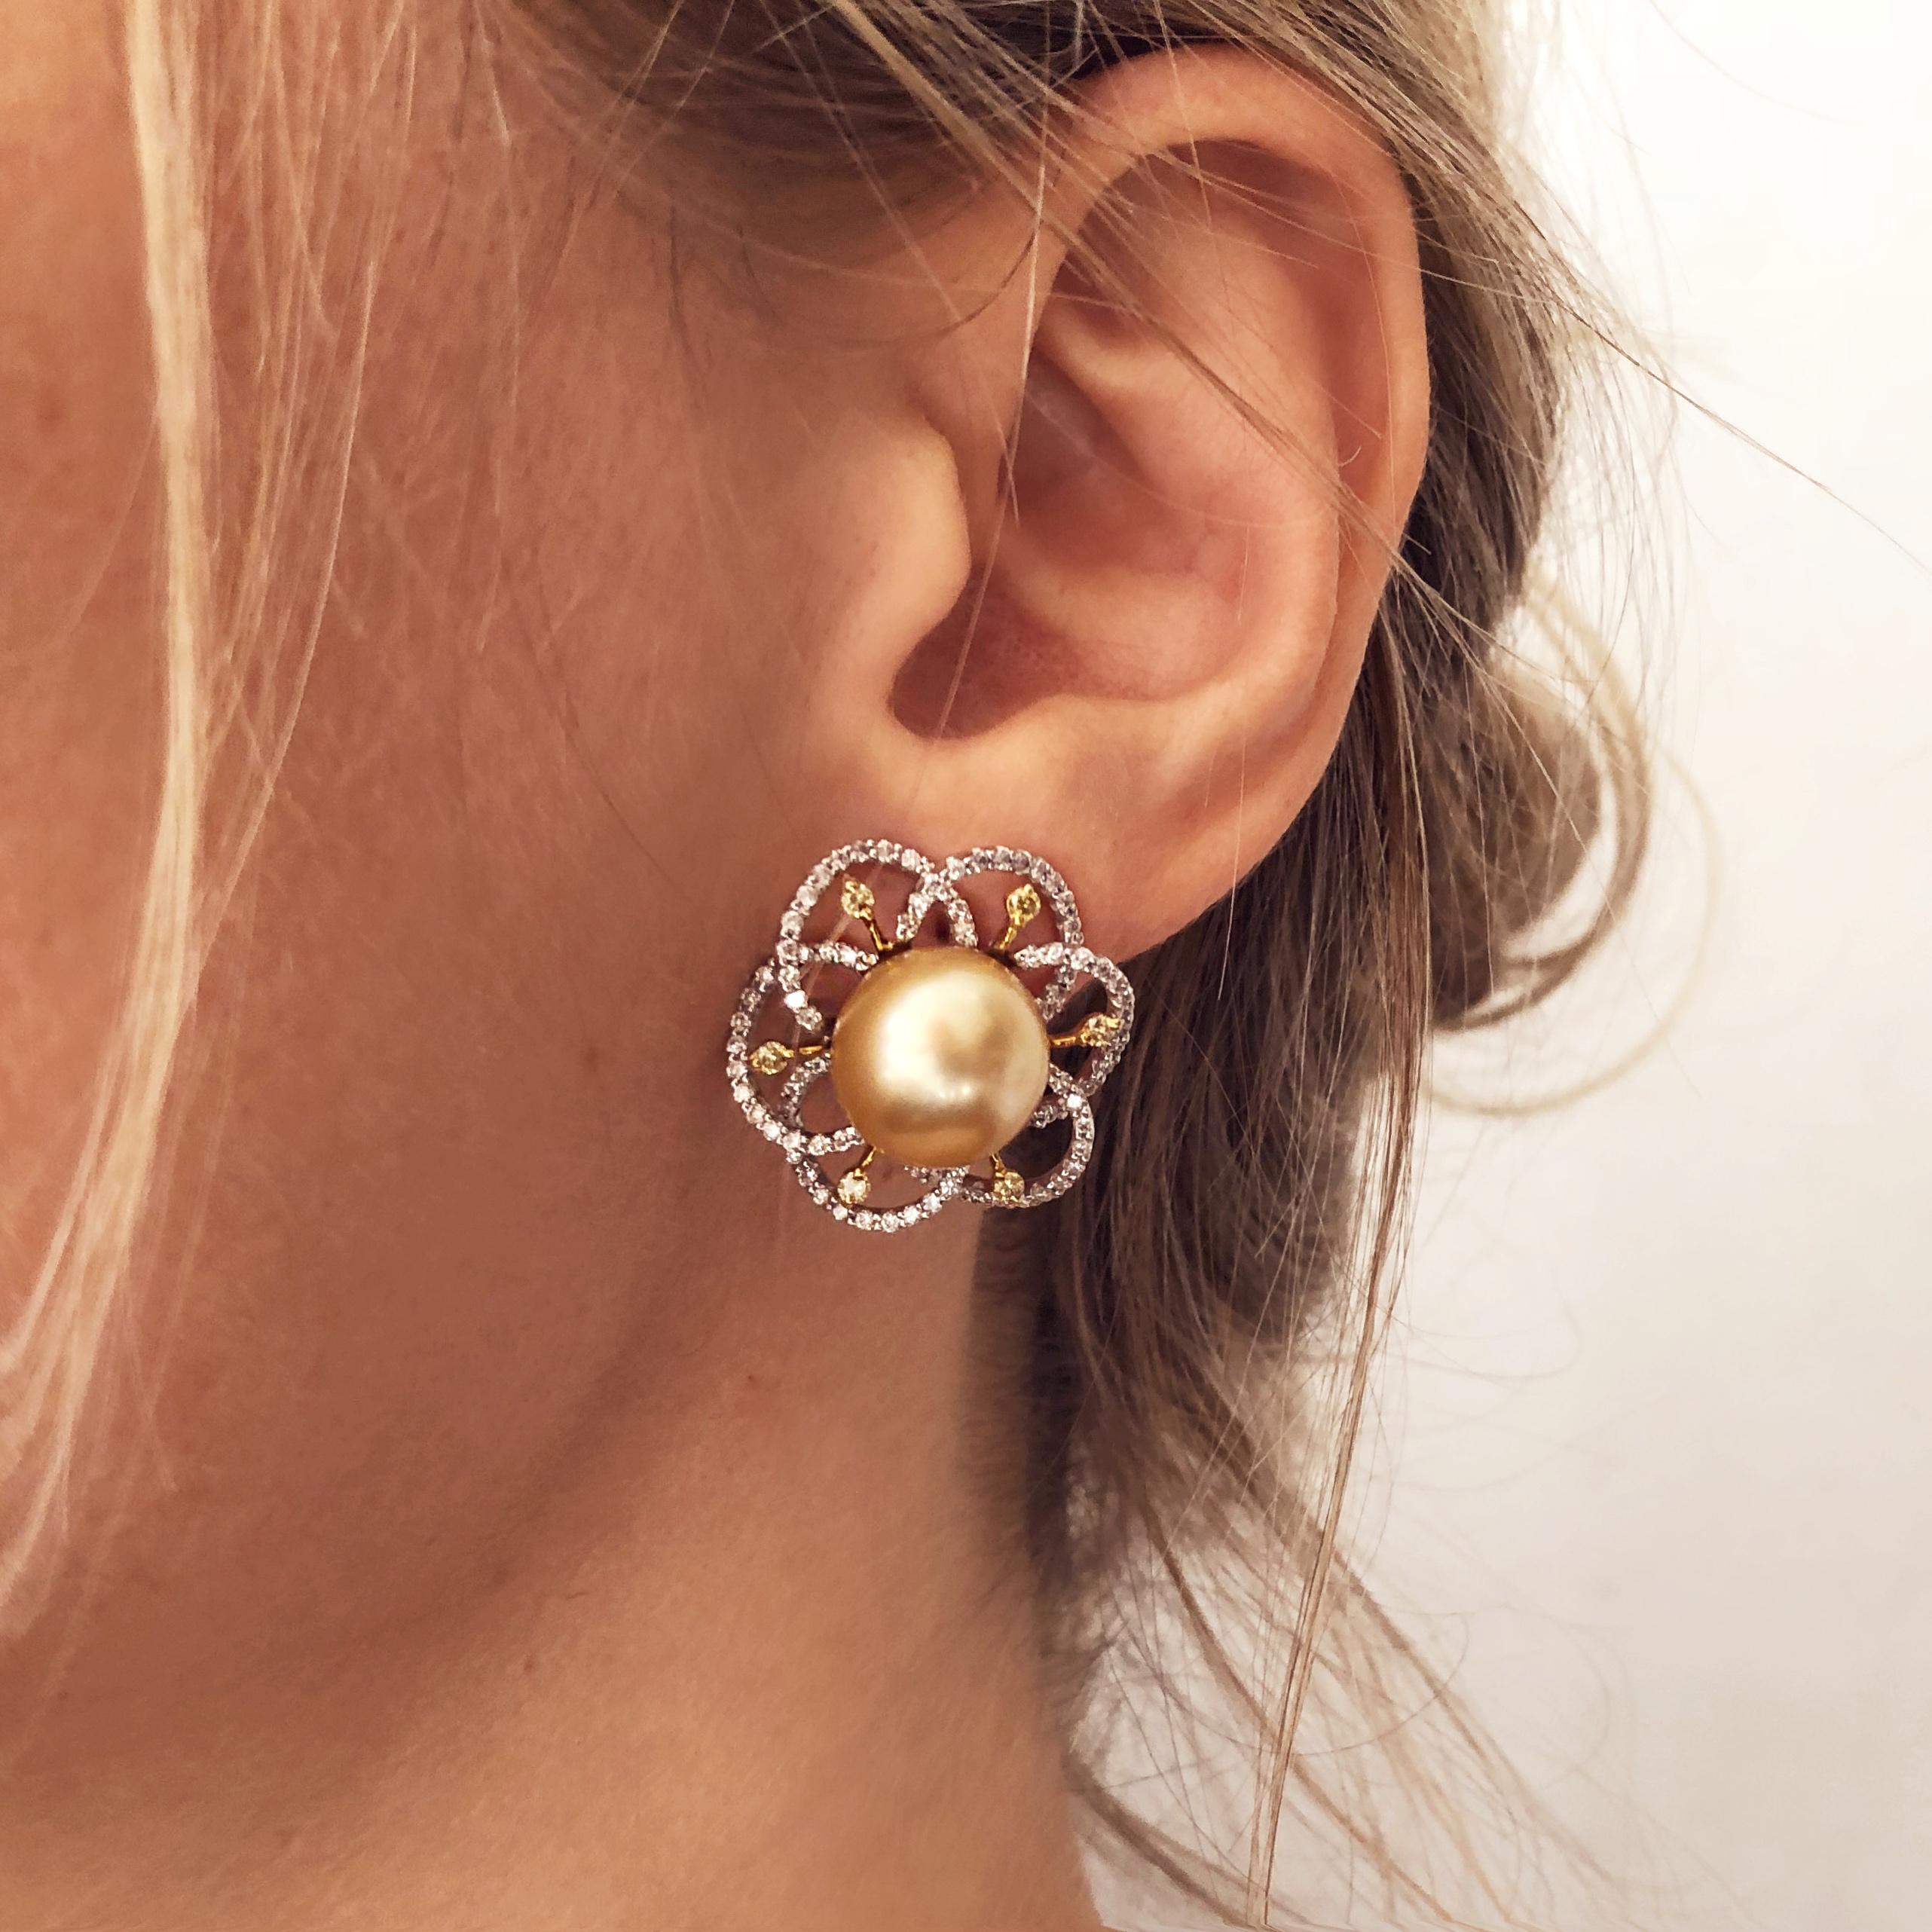 These unique flower shaped earrings by YOKO London feature 12-13mm Golden South Sea pearls at the heart of their design. The rich colour of these pearls is complimented perfectly by the delicate 18 Karat white gold floral design which completed by a